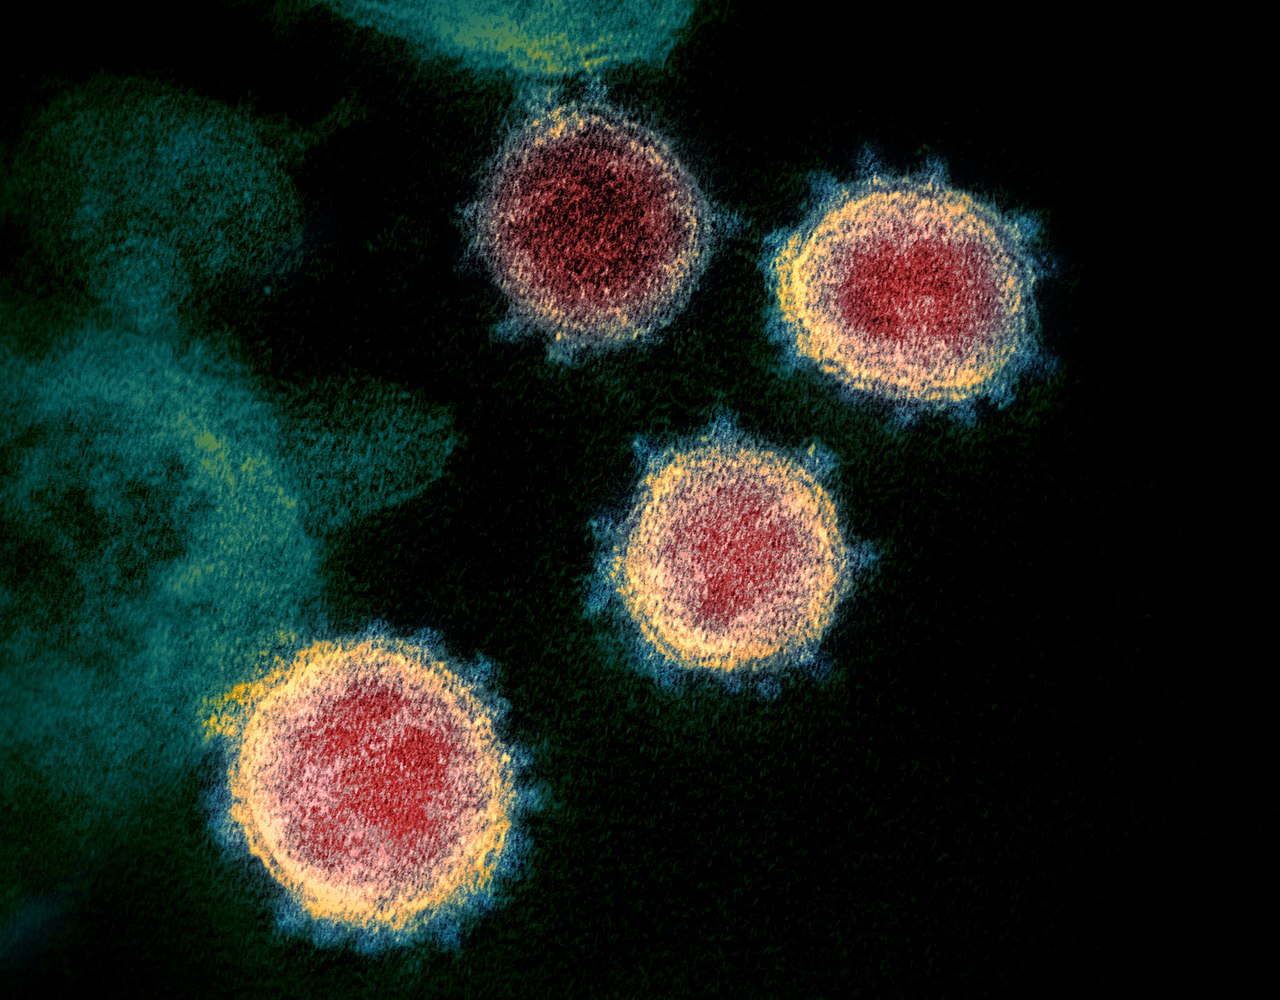 Microscopy image showing SARS-CoV-2. The spikes on the outer edge of the virus particles resemble a crown, giving the disease its characteristic name: Coronavirus. (NIAID Rocky Mountain Laboratories / Wikipedia)